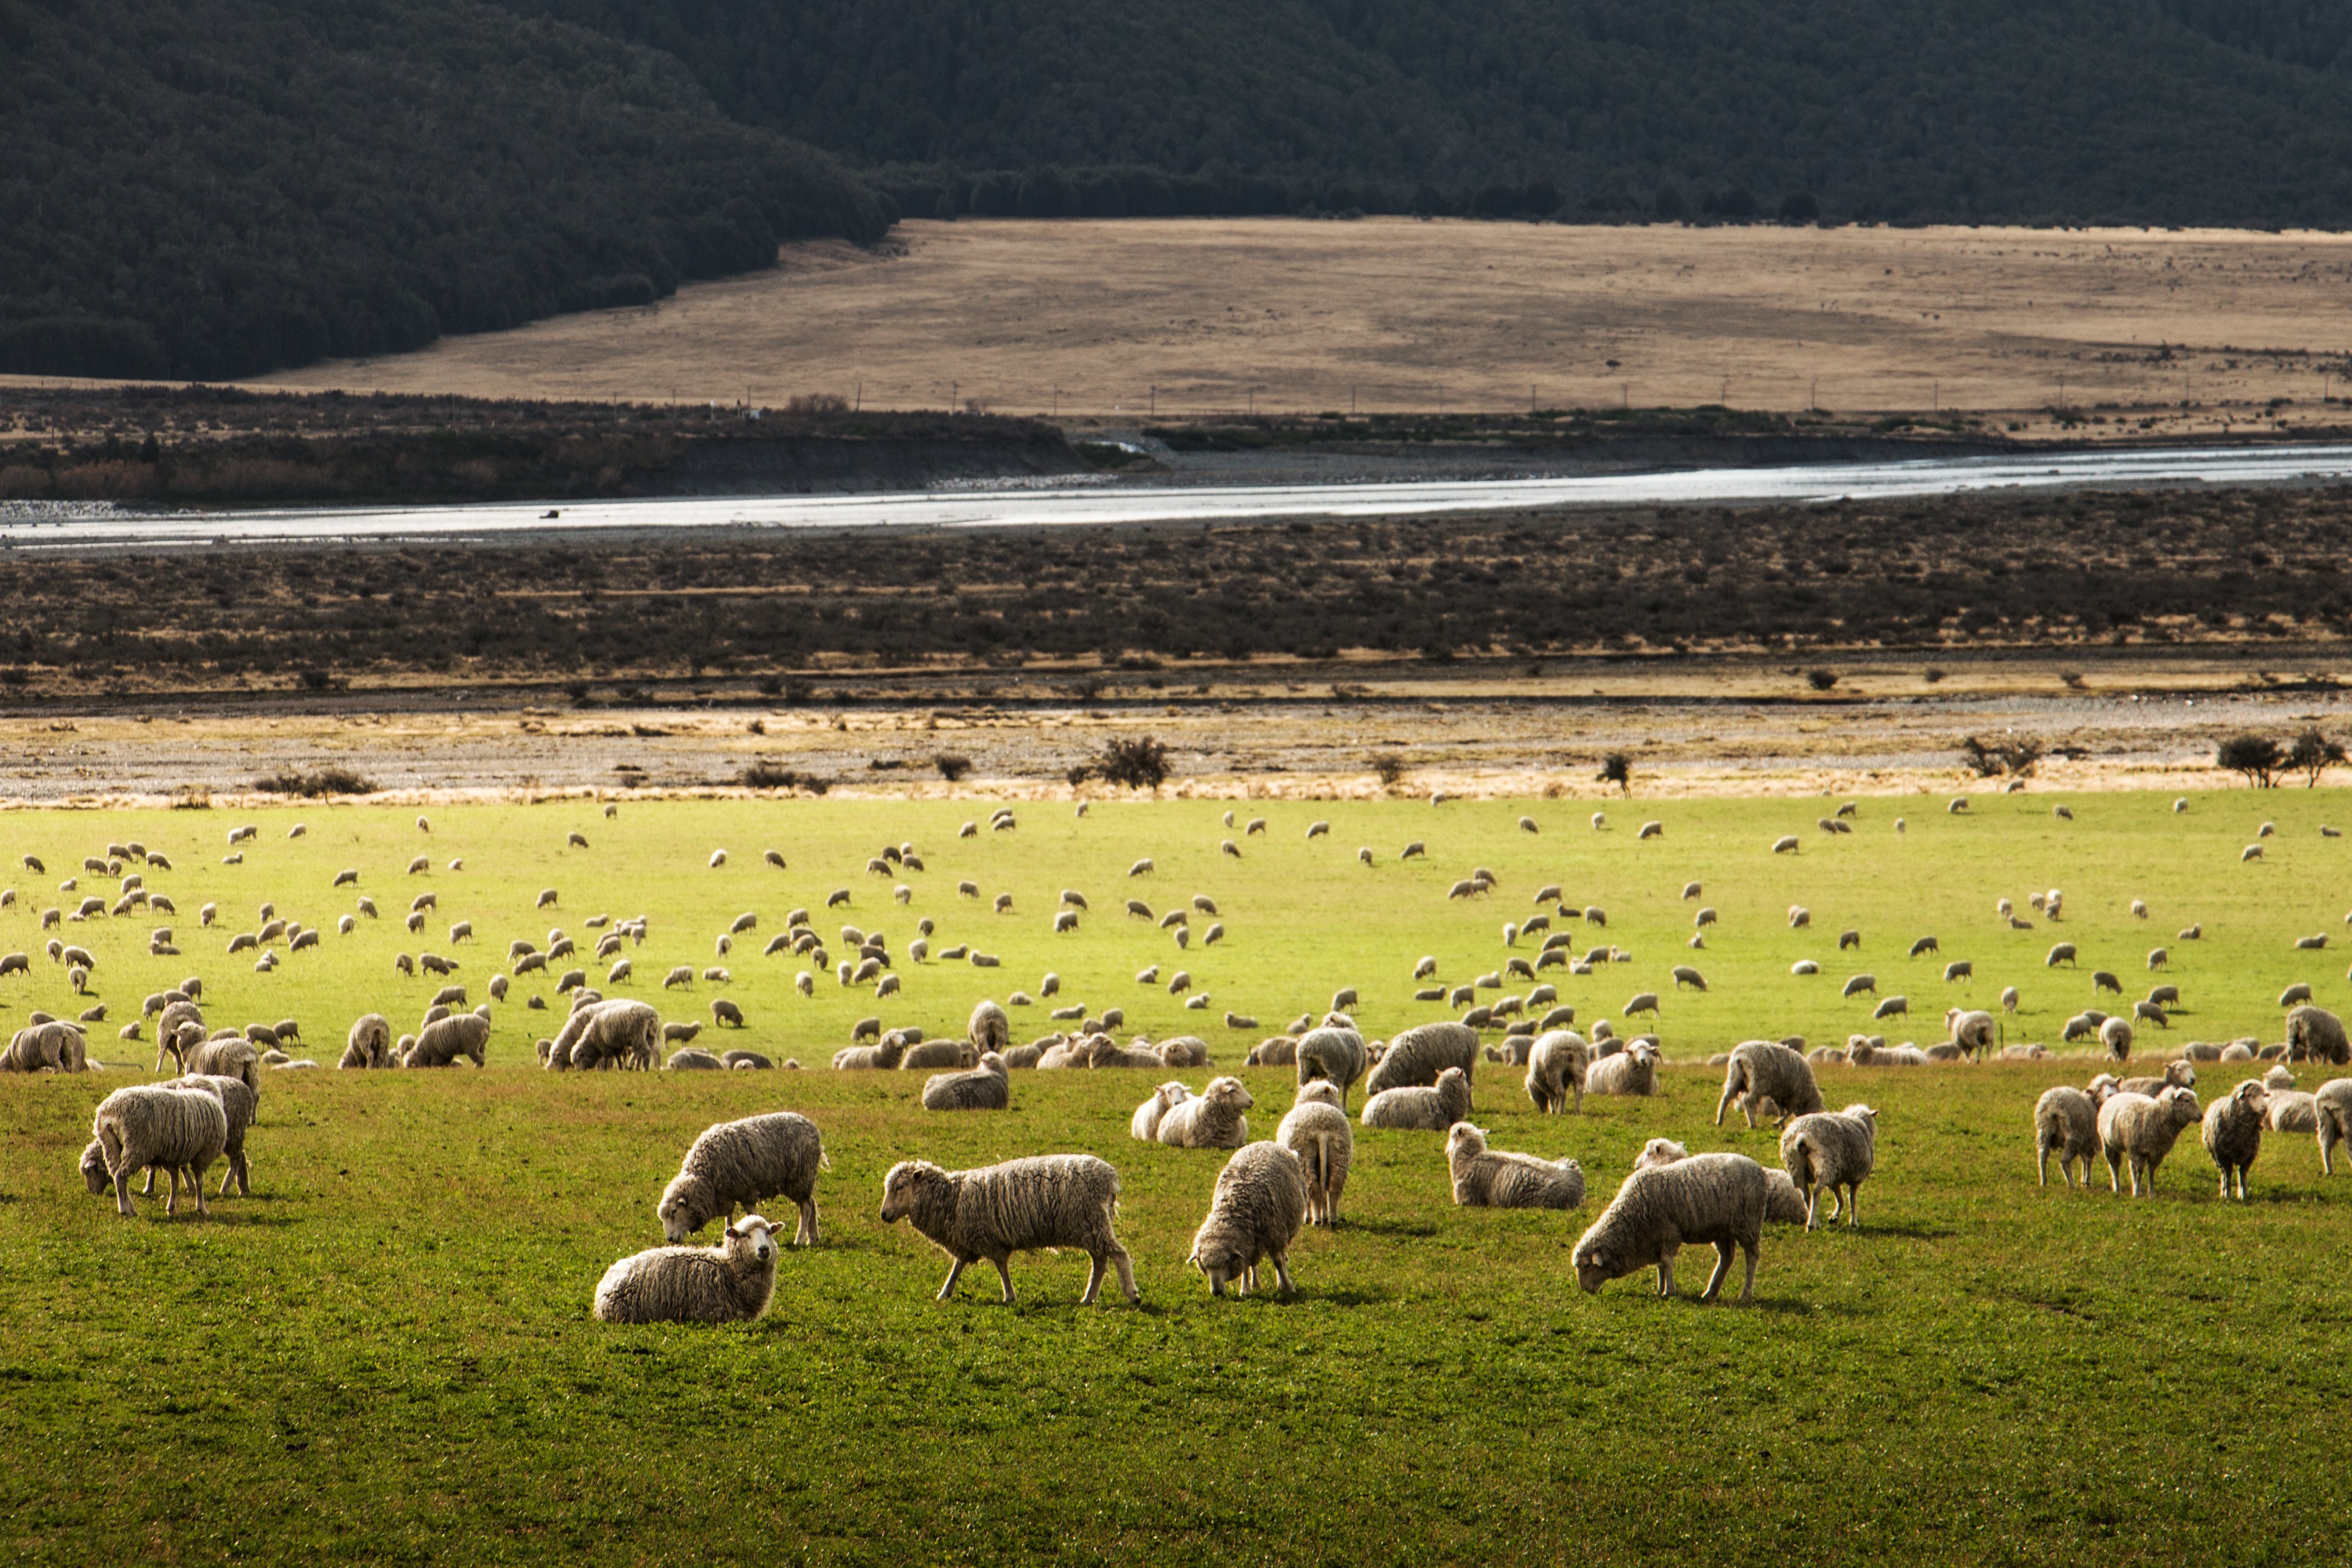 A herd of sheep grazing on farm land.